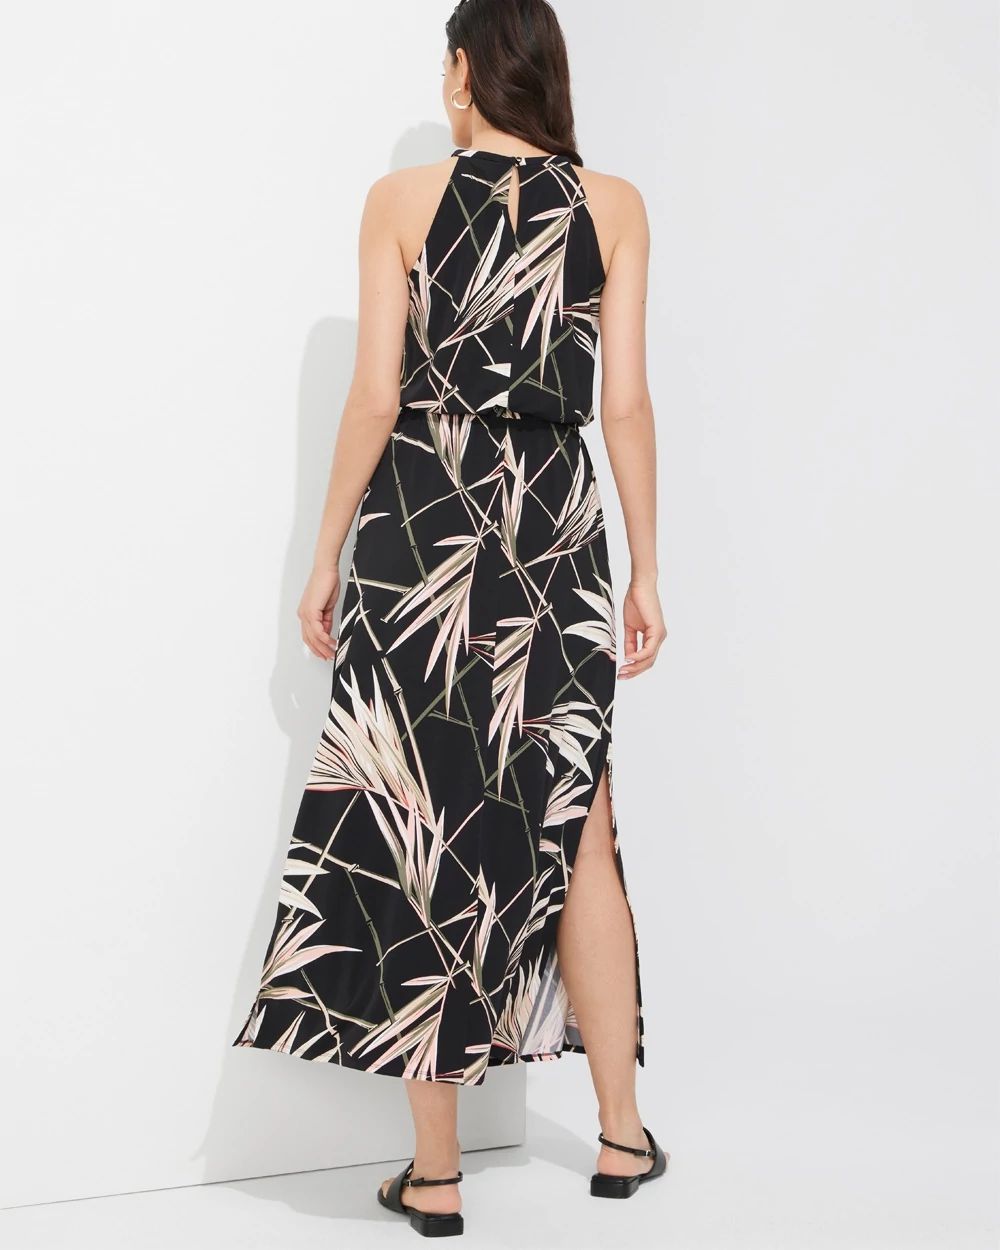 Outlet WHBM Halter Maxi Dress click to view larger image.